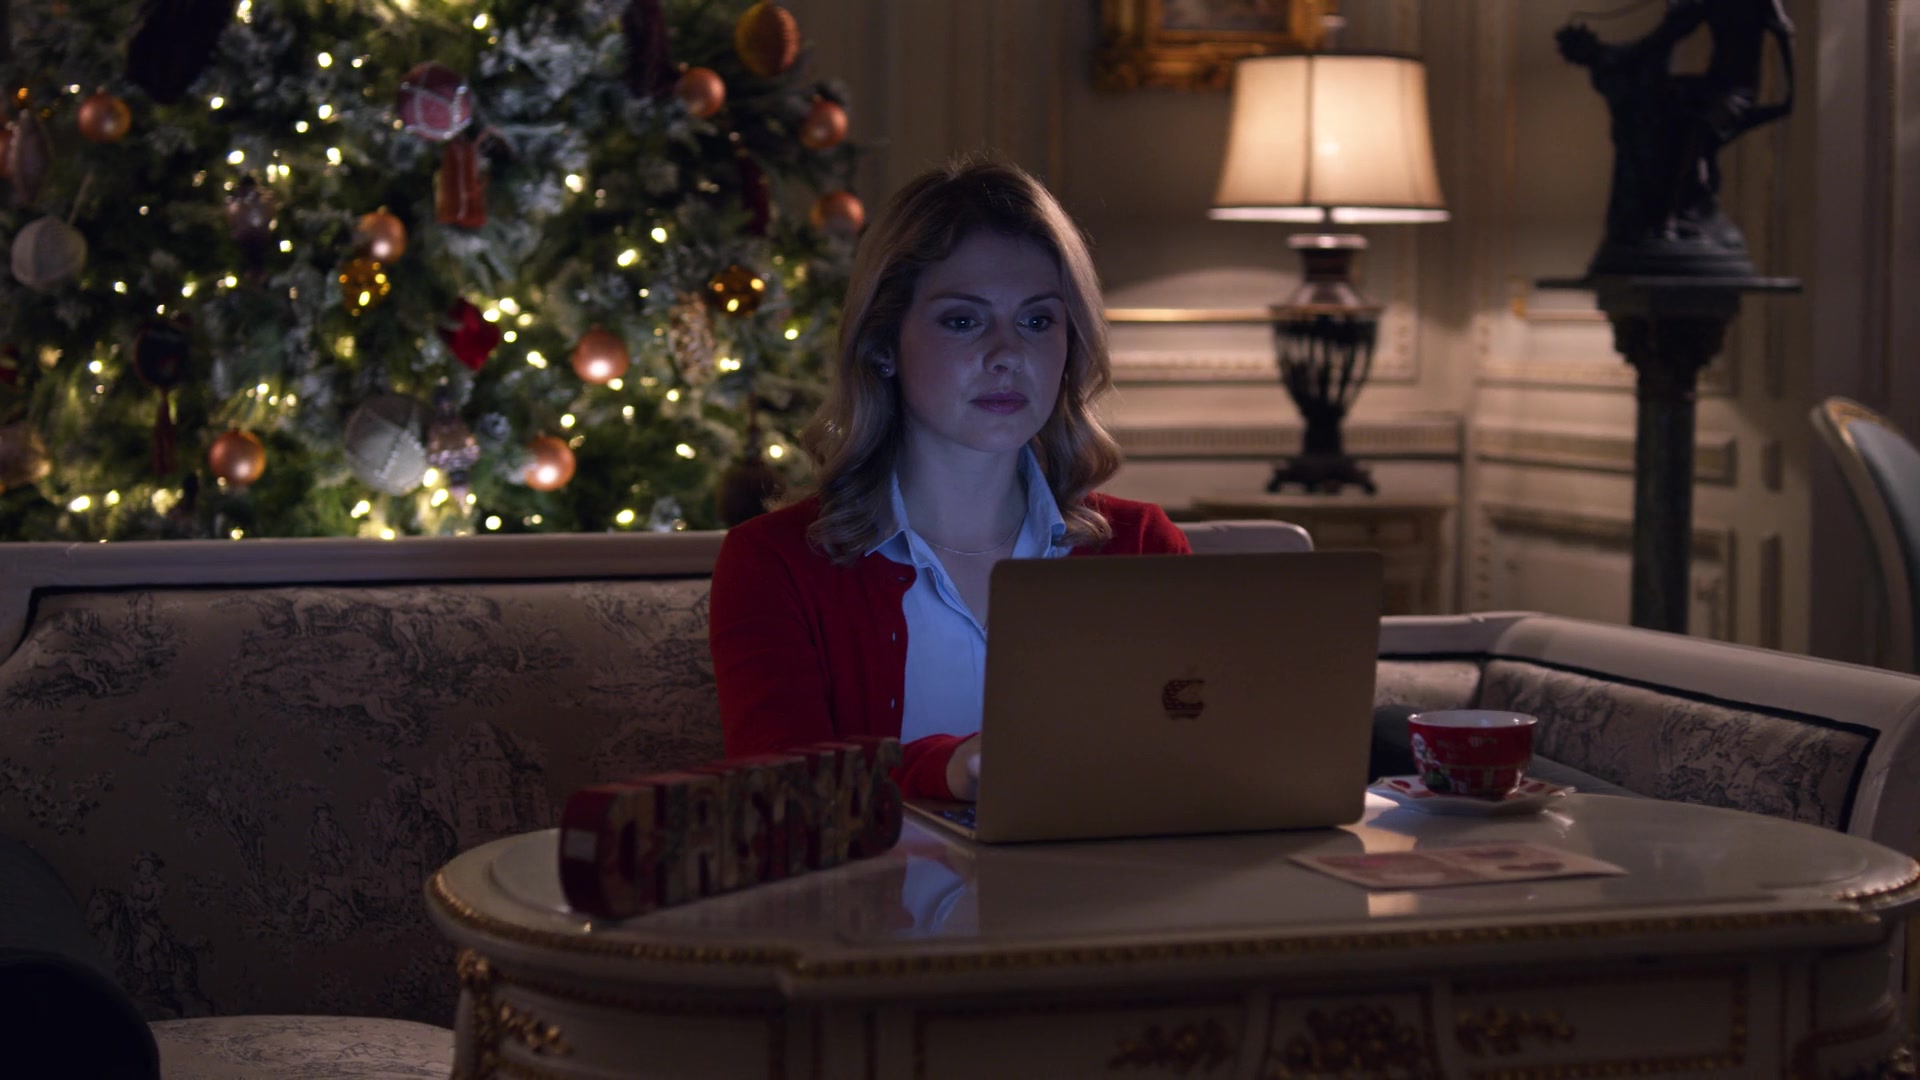 Apple MacBook Laptop Used by Rose McIver in A Christmas Prince: The Royal Wedding (2018)